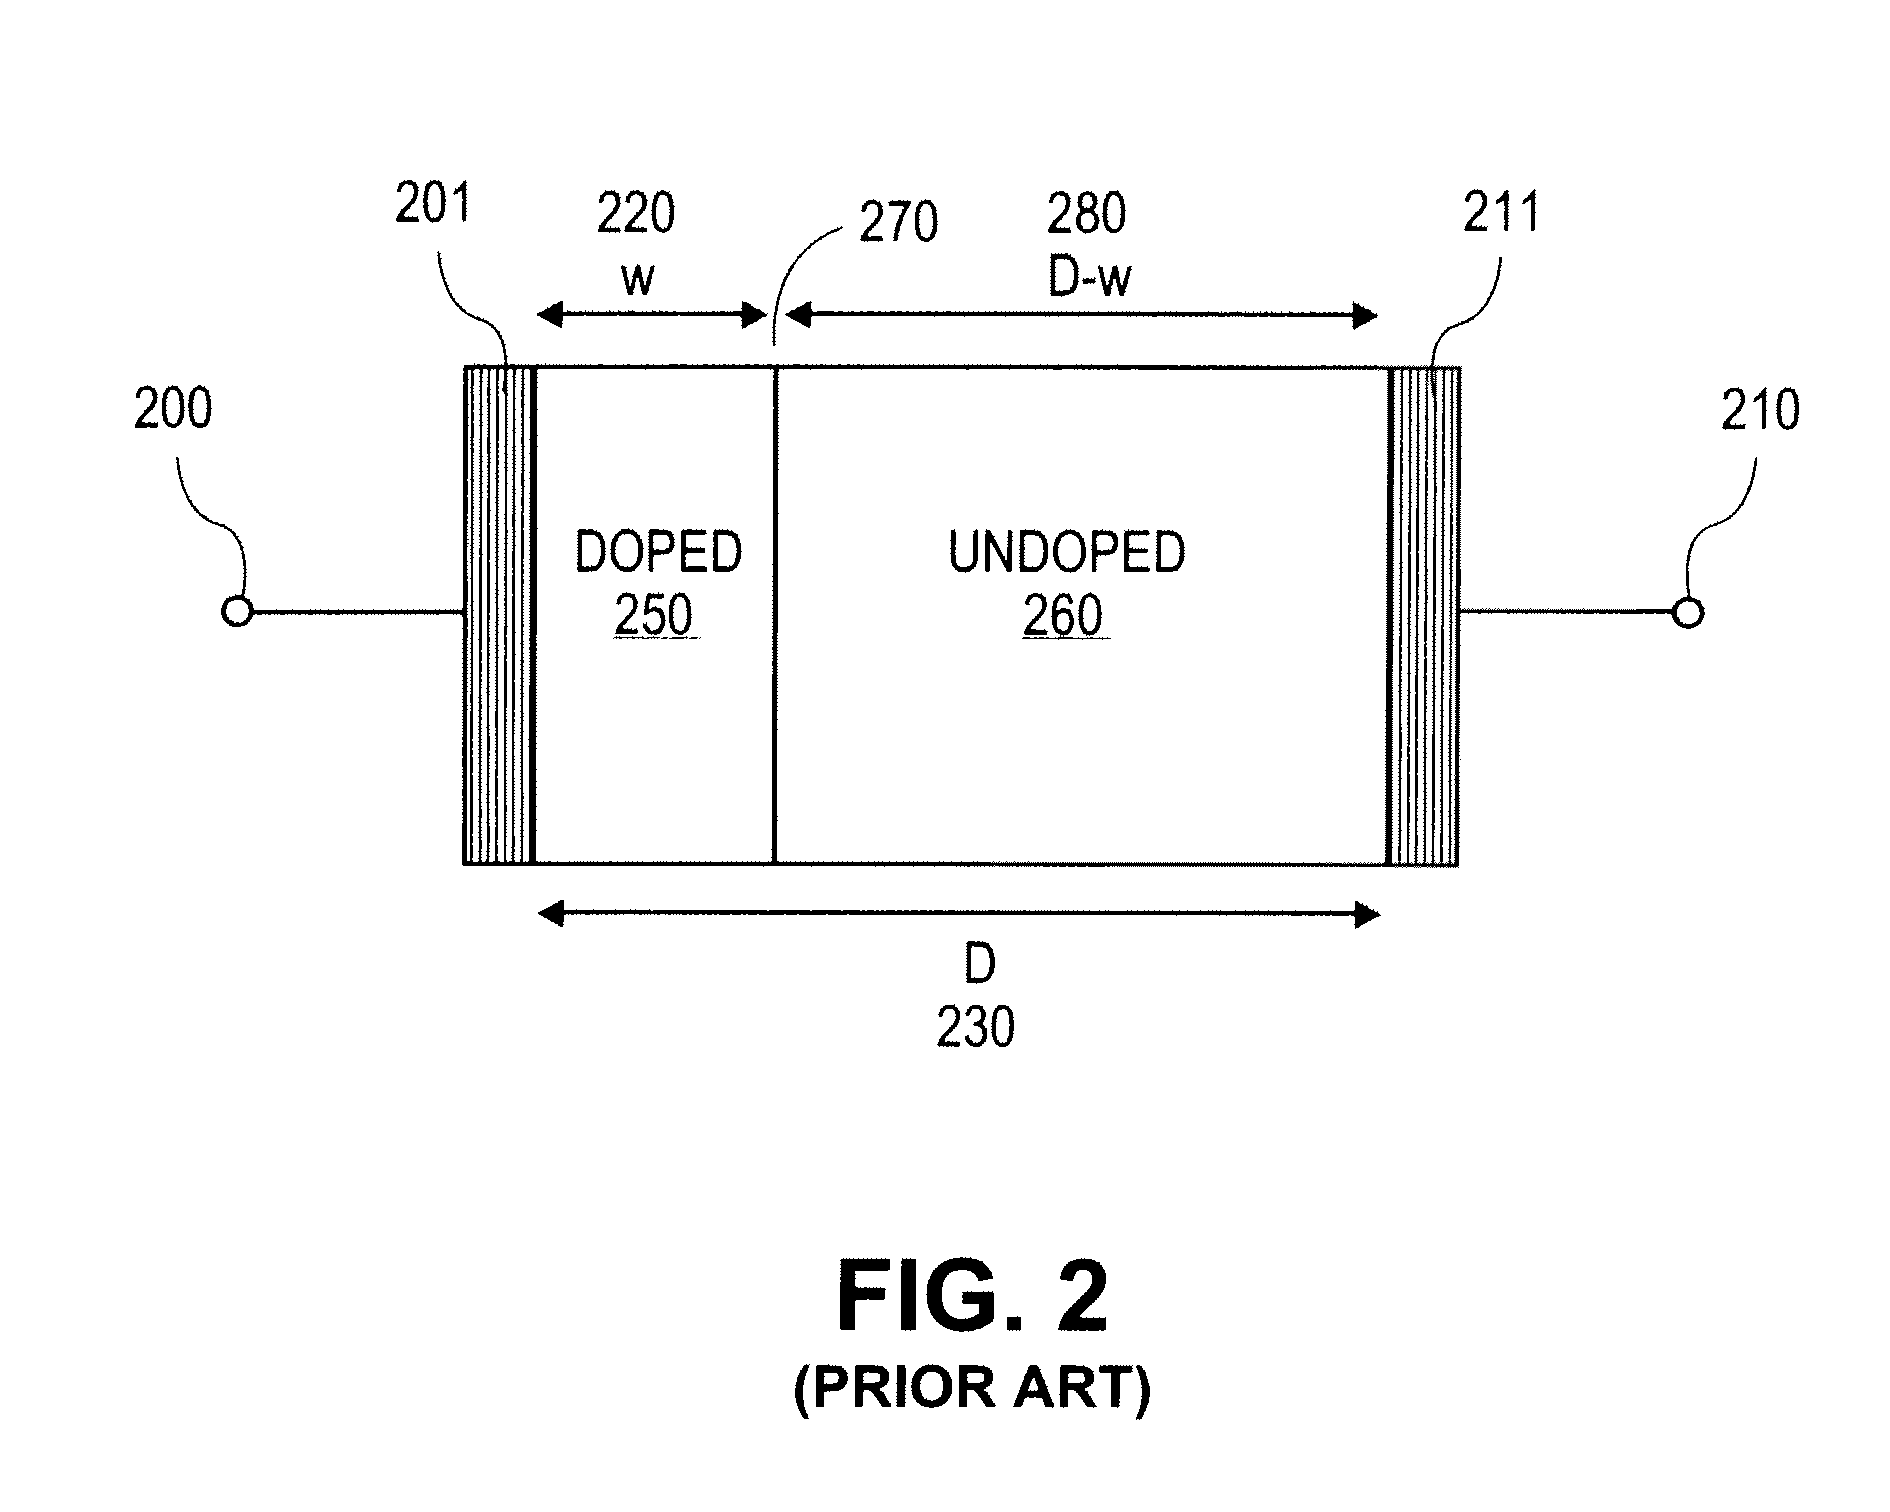 Signal-processing devices having one or more memristors